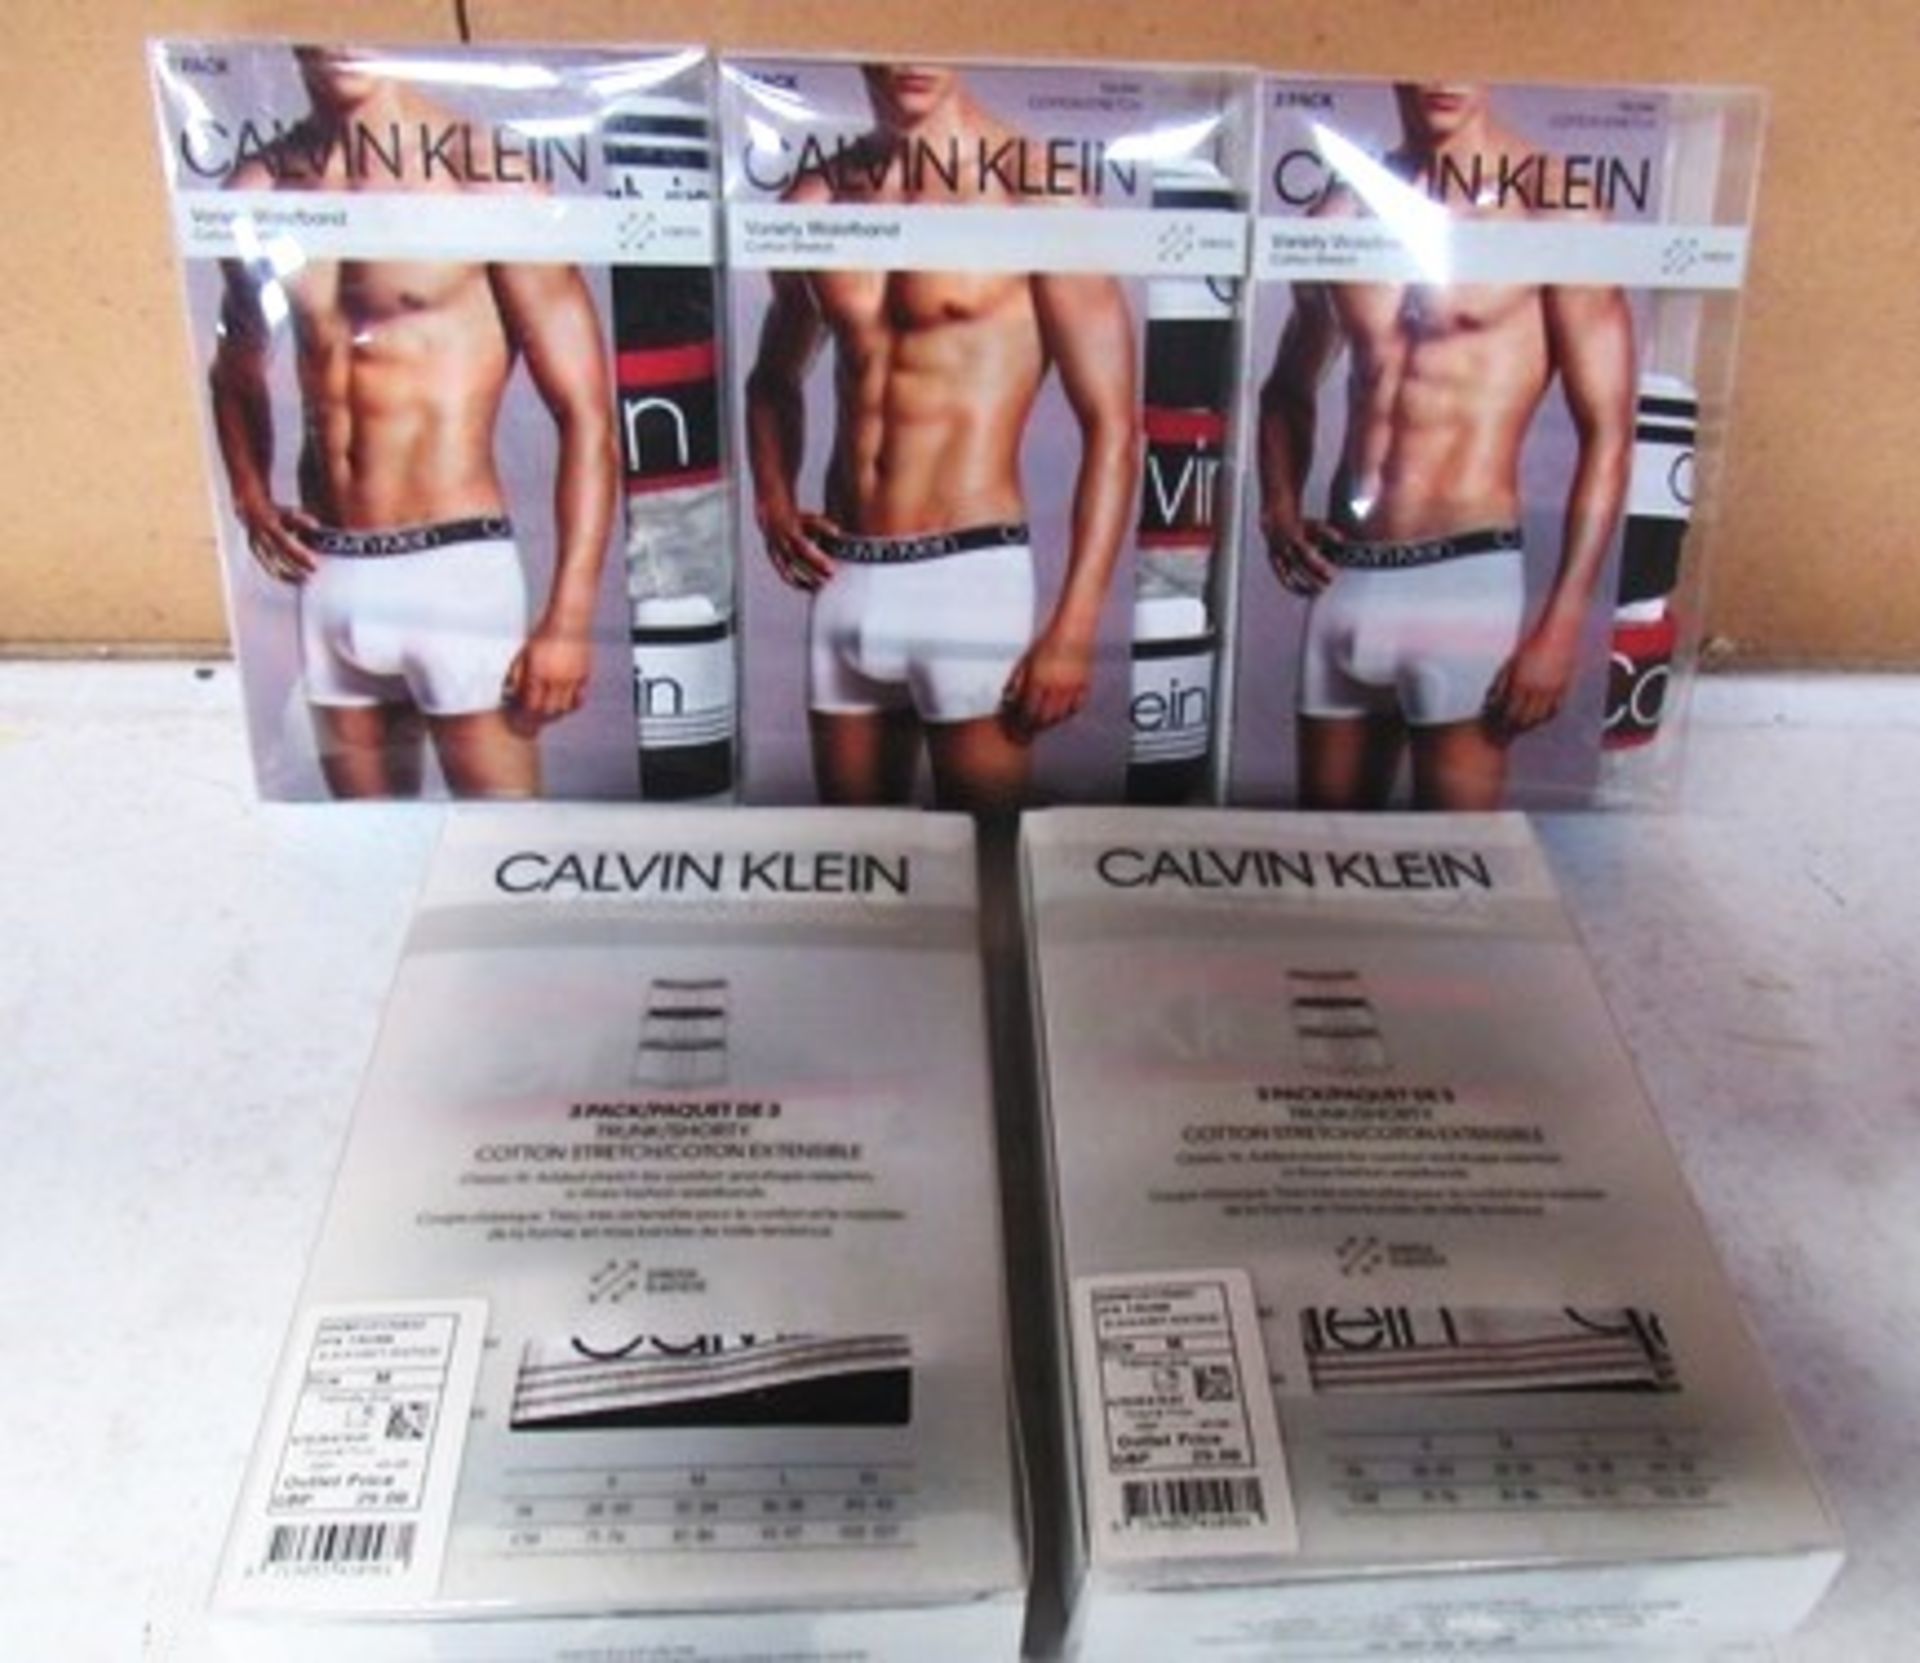 6 x boxes each containing 3 pack Calvin Klein boxer trunks, size M - Sealed new in pack (ES15B)